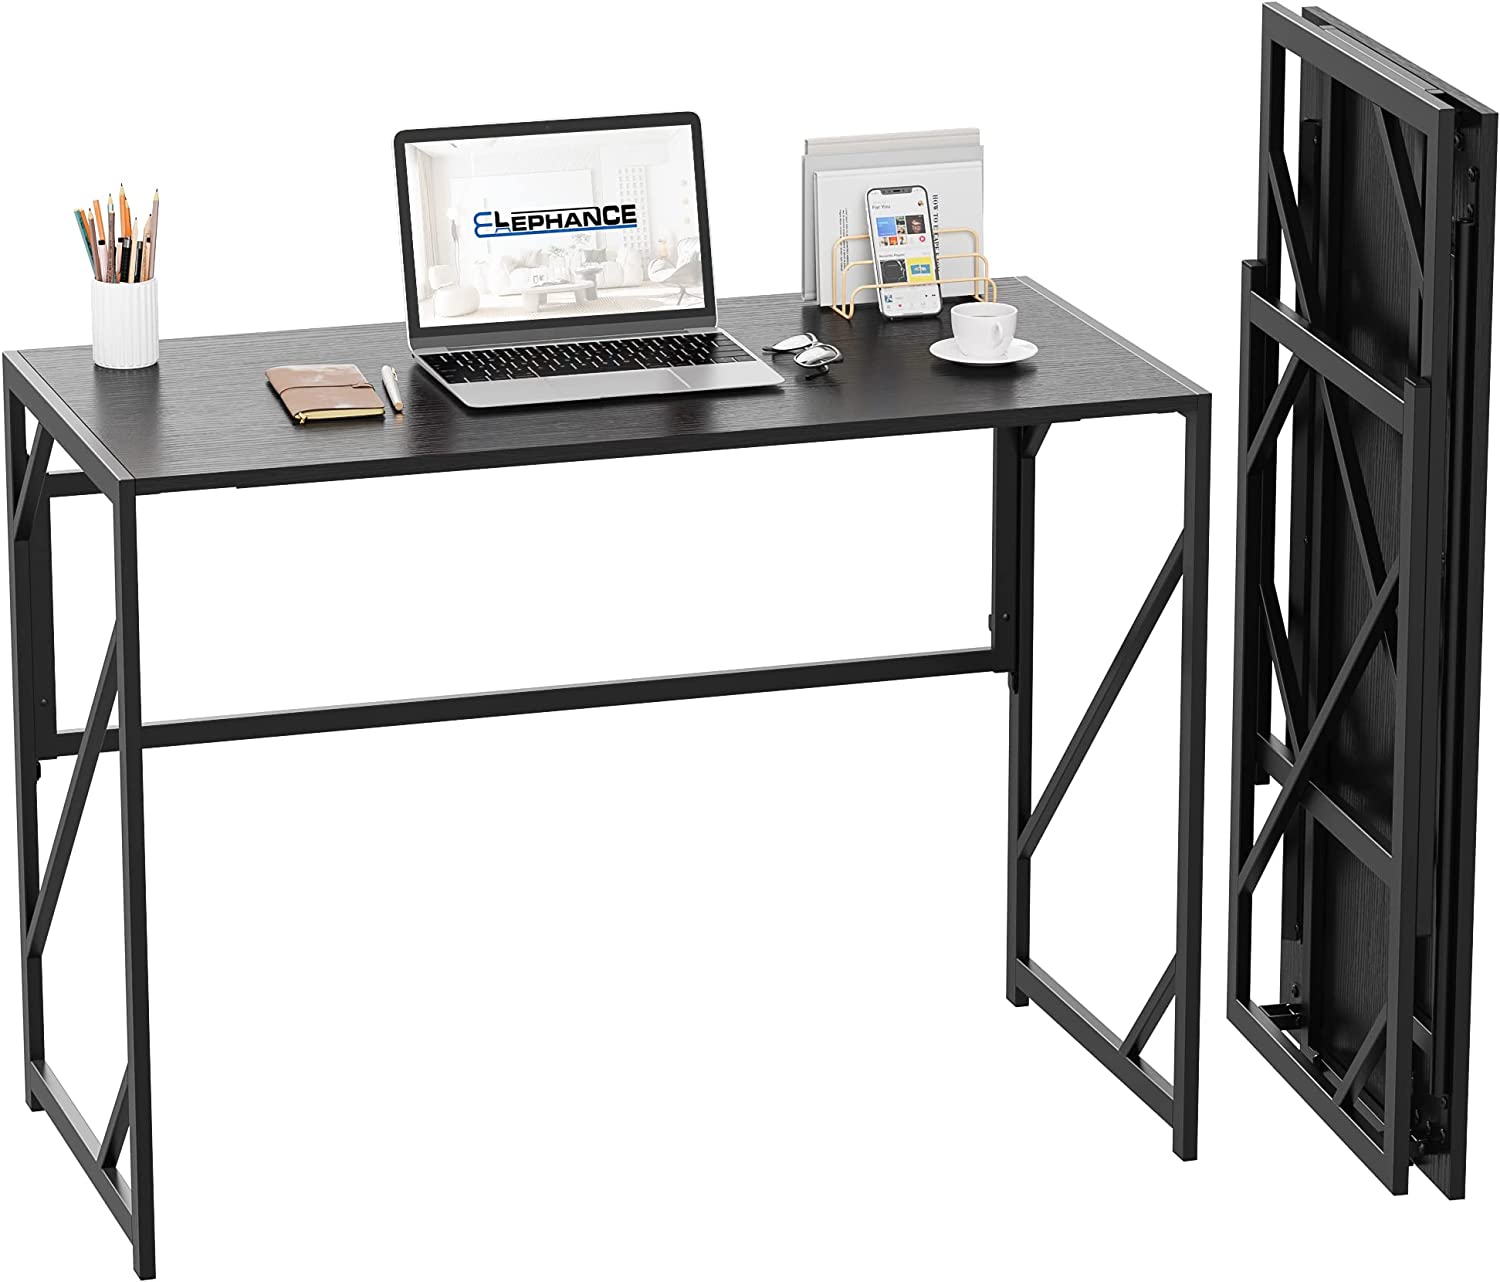 9 Best Collapsible, Folding Desks (Don't Buy This 1)